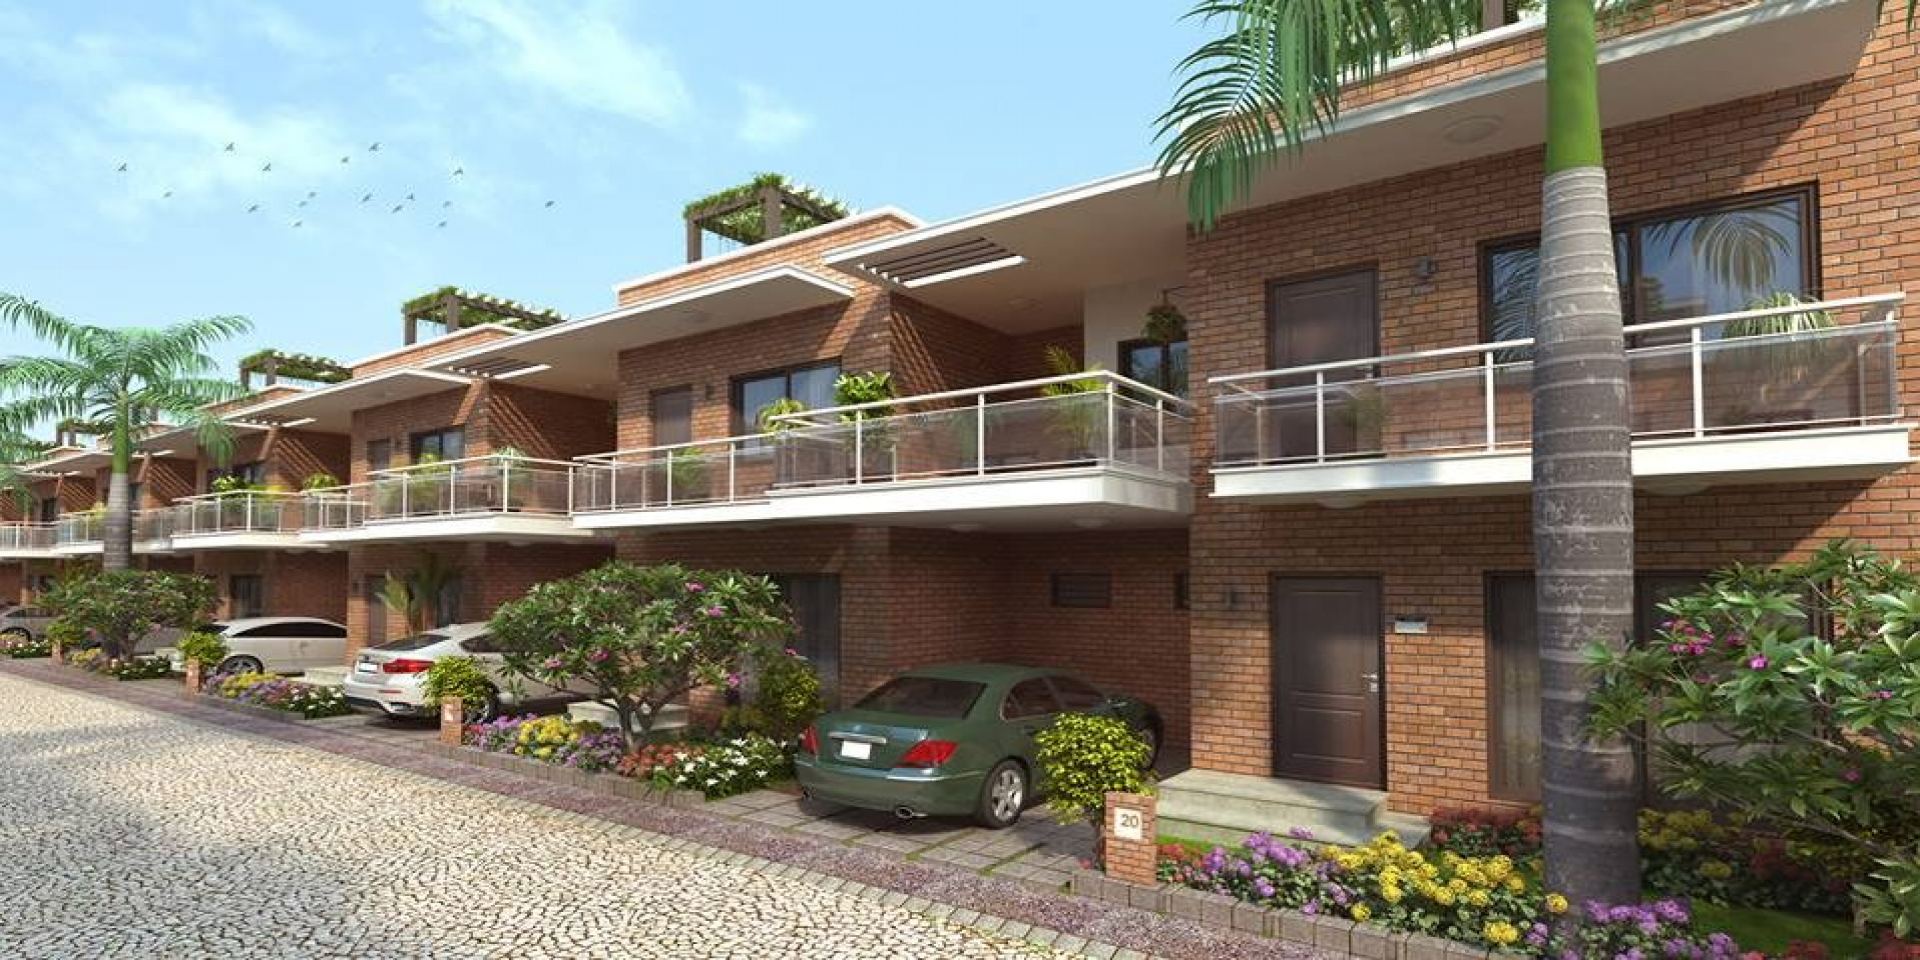 3, 4 BHK House for sale in Attibele